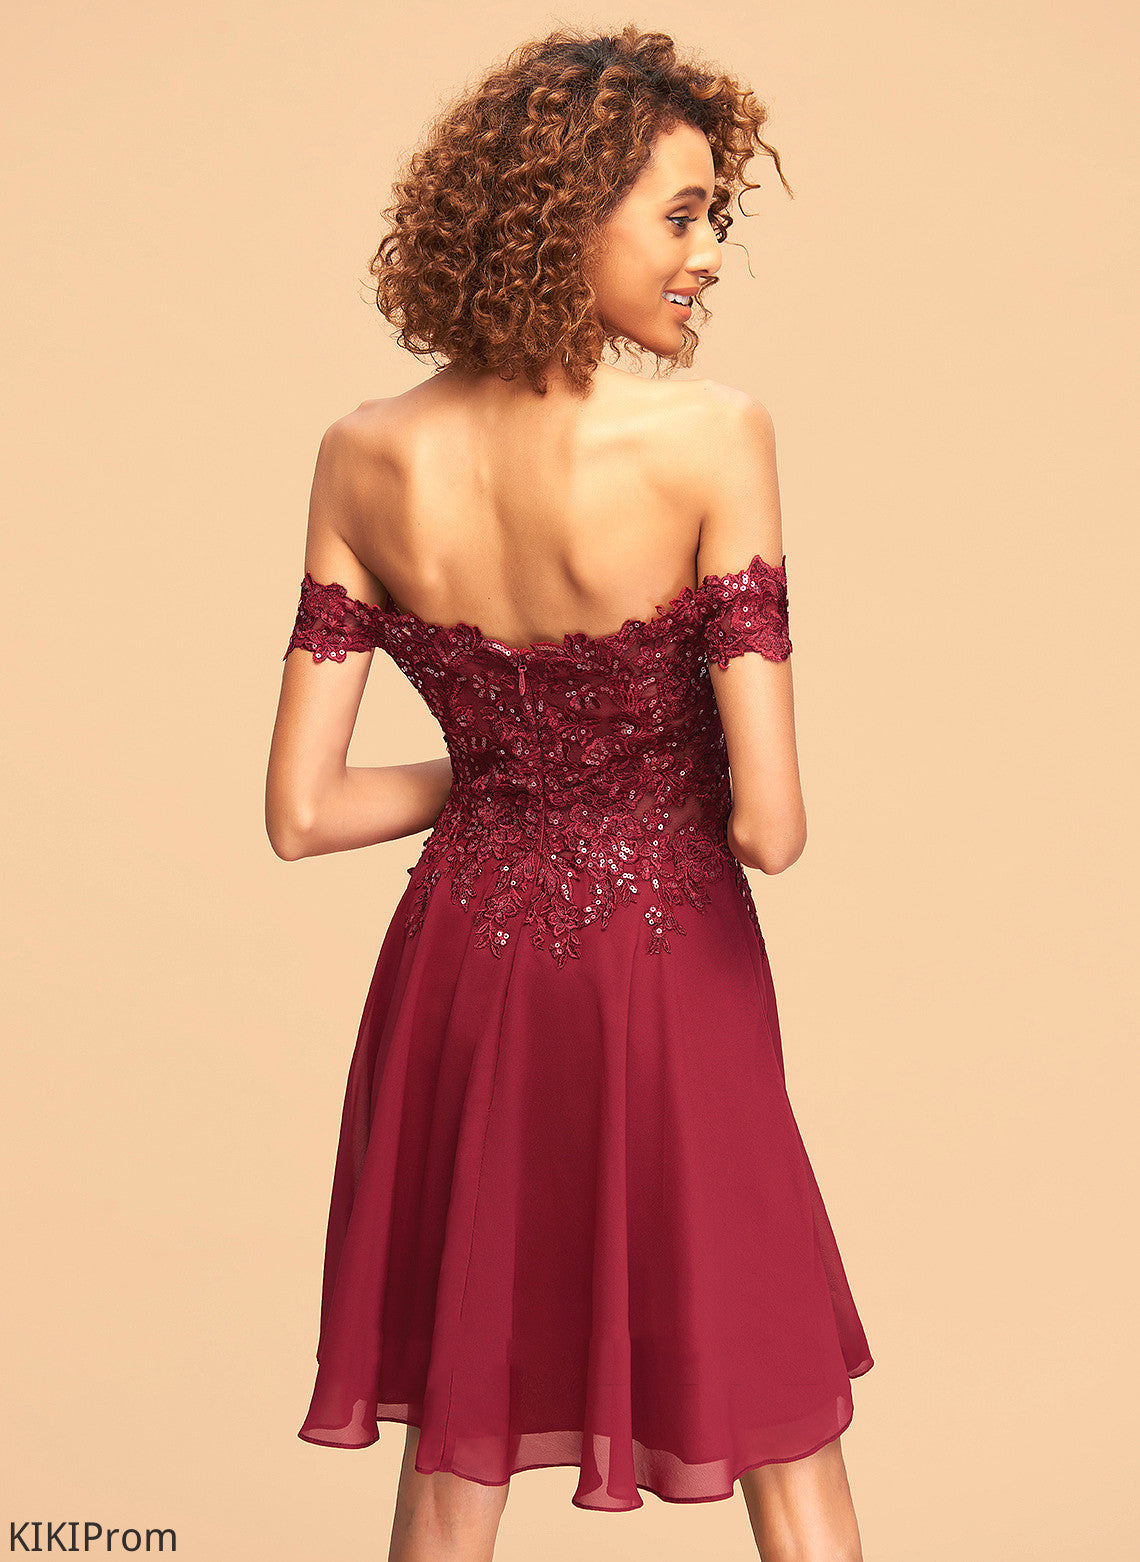 Sequins Dress A-Line Short/Mini Off-the-Shoulder With Harriet Homecoming Dresses Homecoming Lace Chiffon